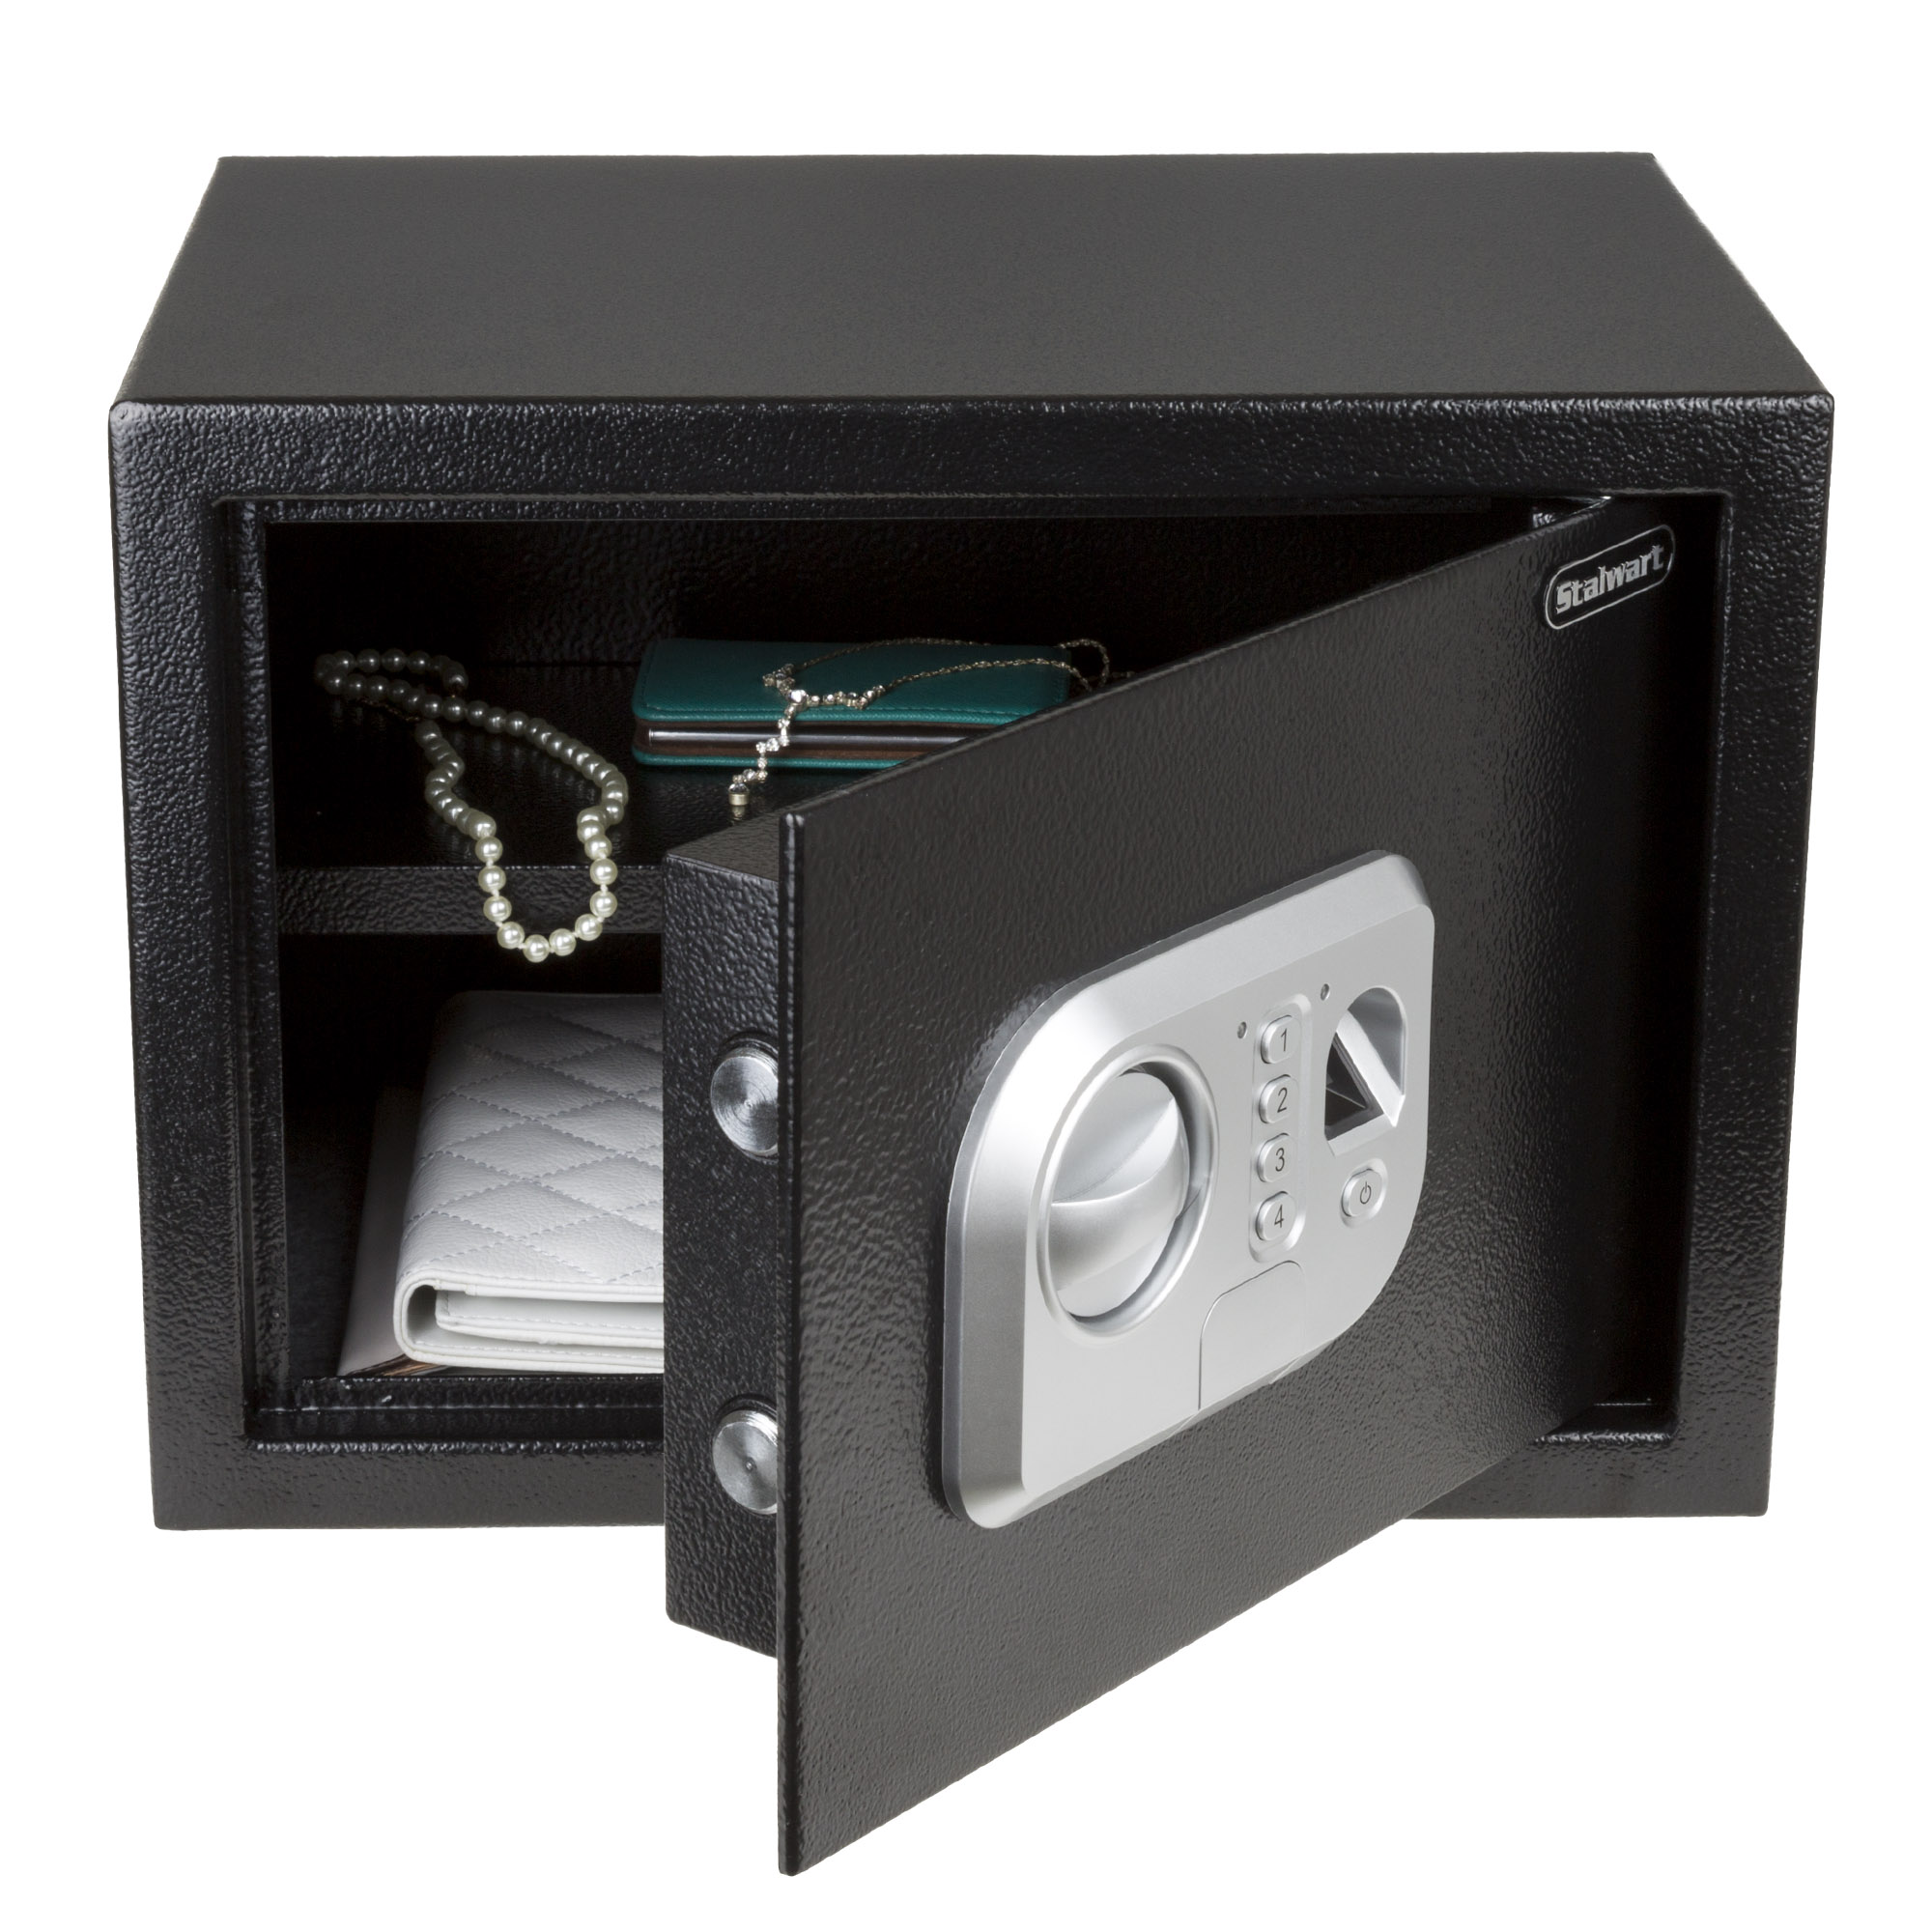 Electronic Safe with Fingerprint Lock for Business or Home ?Key or Biometric Entry Digital Wall or Floor Mount for Jewelry, Cash, and More by Stalwart - image 5 of 7